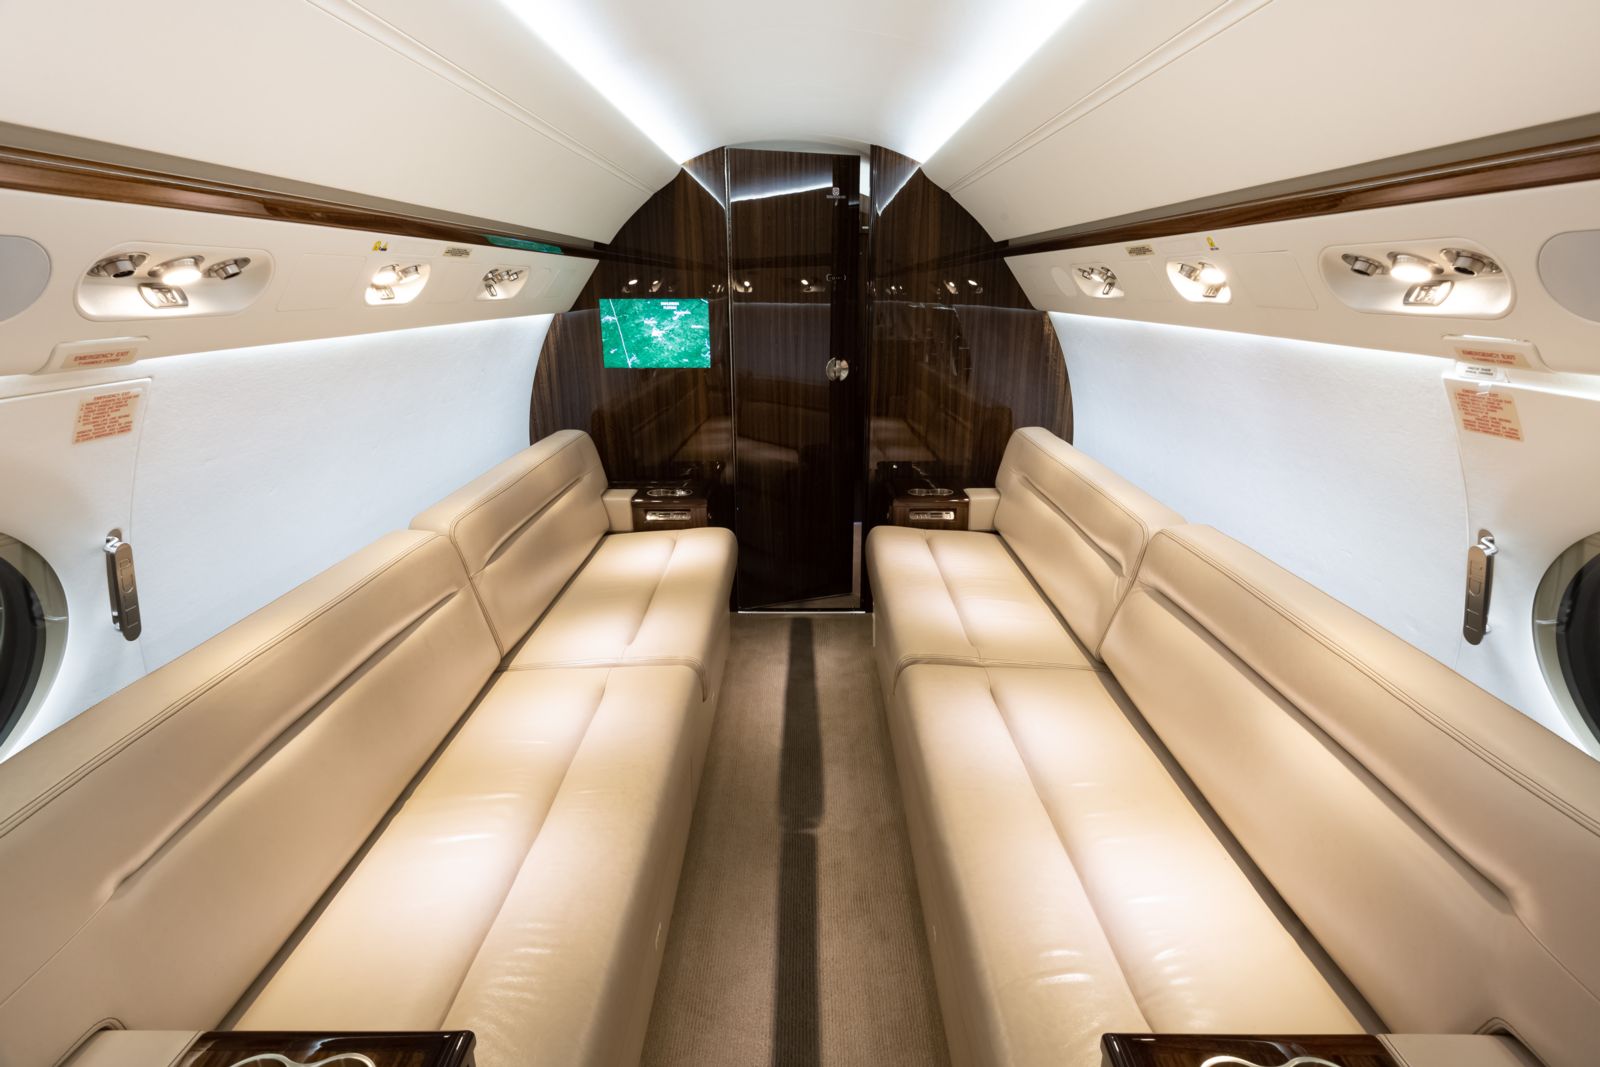 Gulfstream G550  S/N 5448 for sale | gallery image: /userfiles/images/G550_sn5448/aft%20aft.jpg